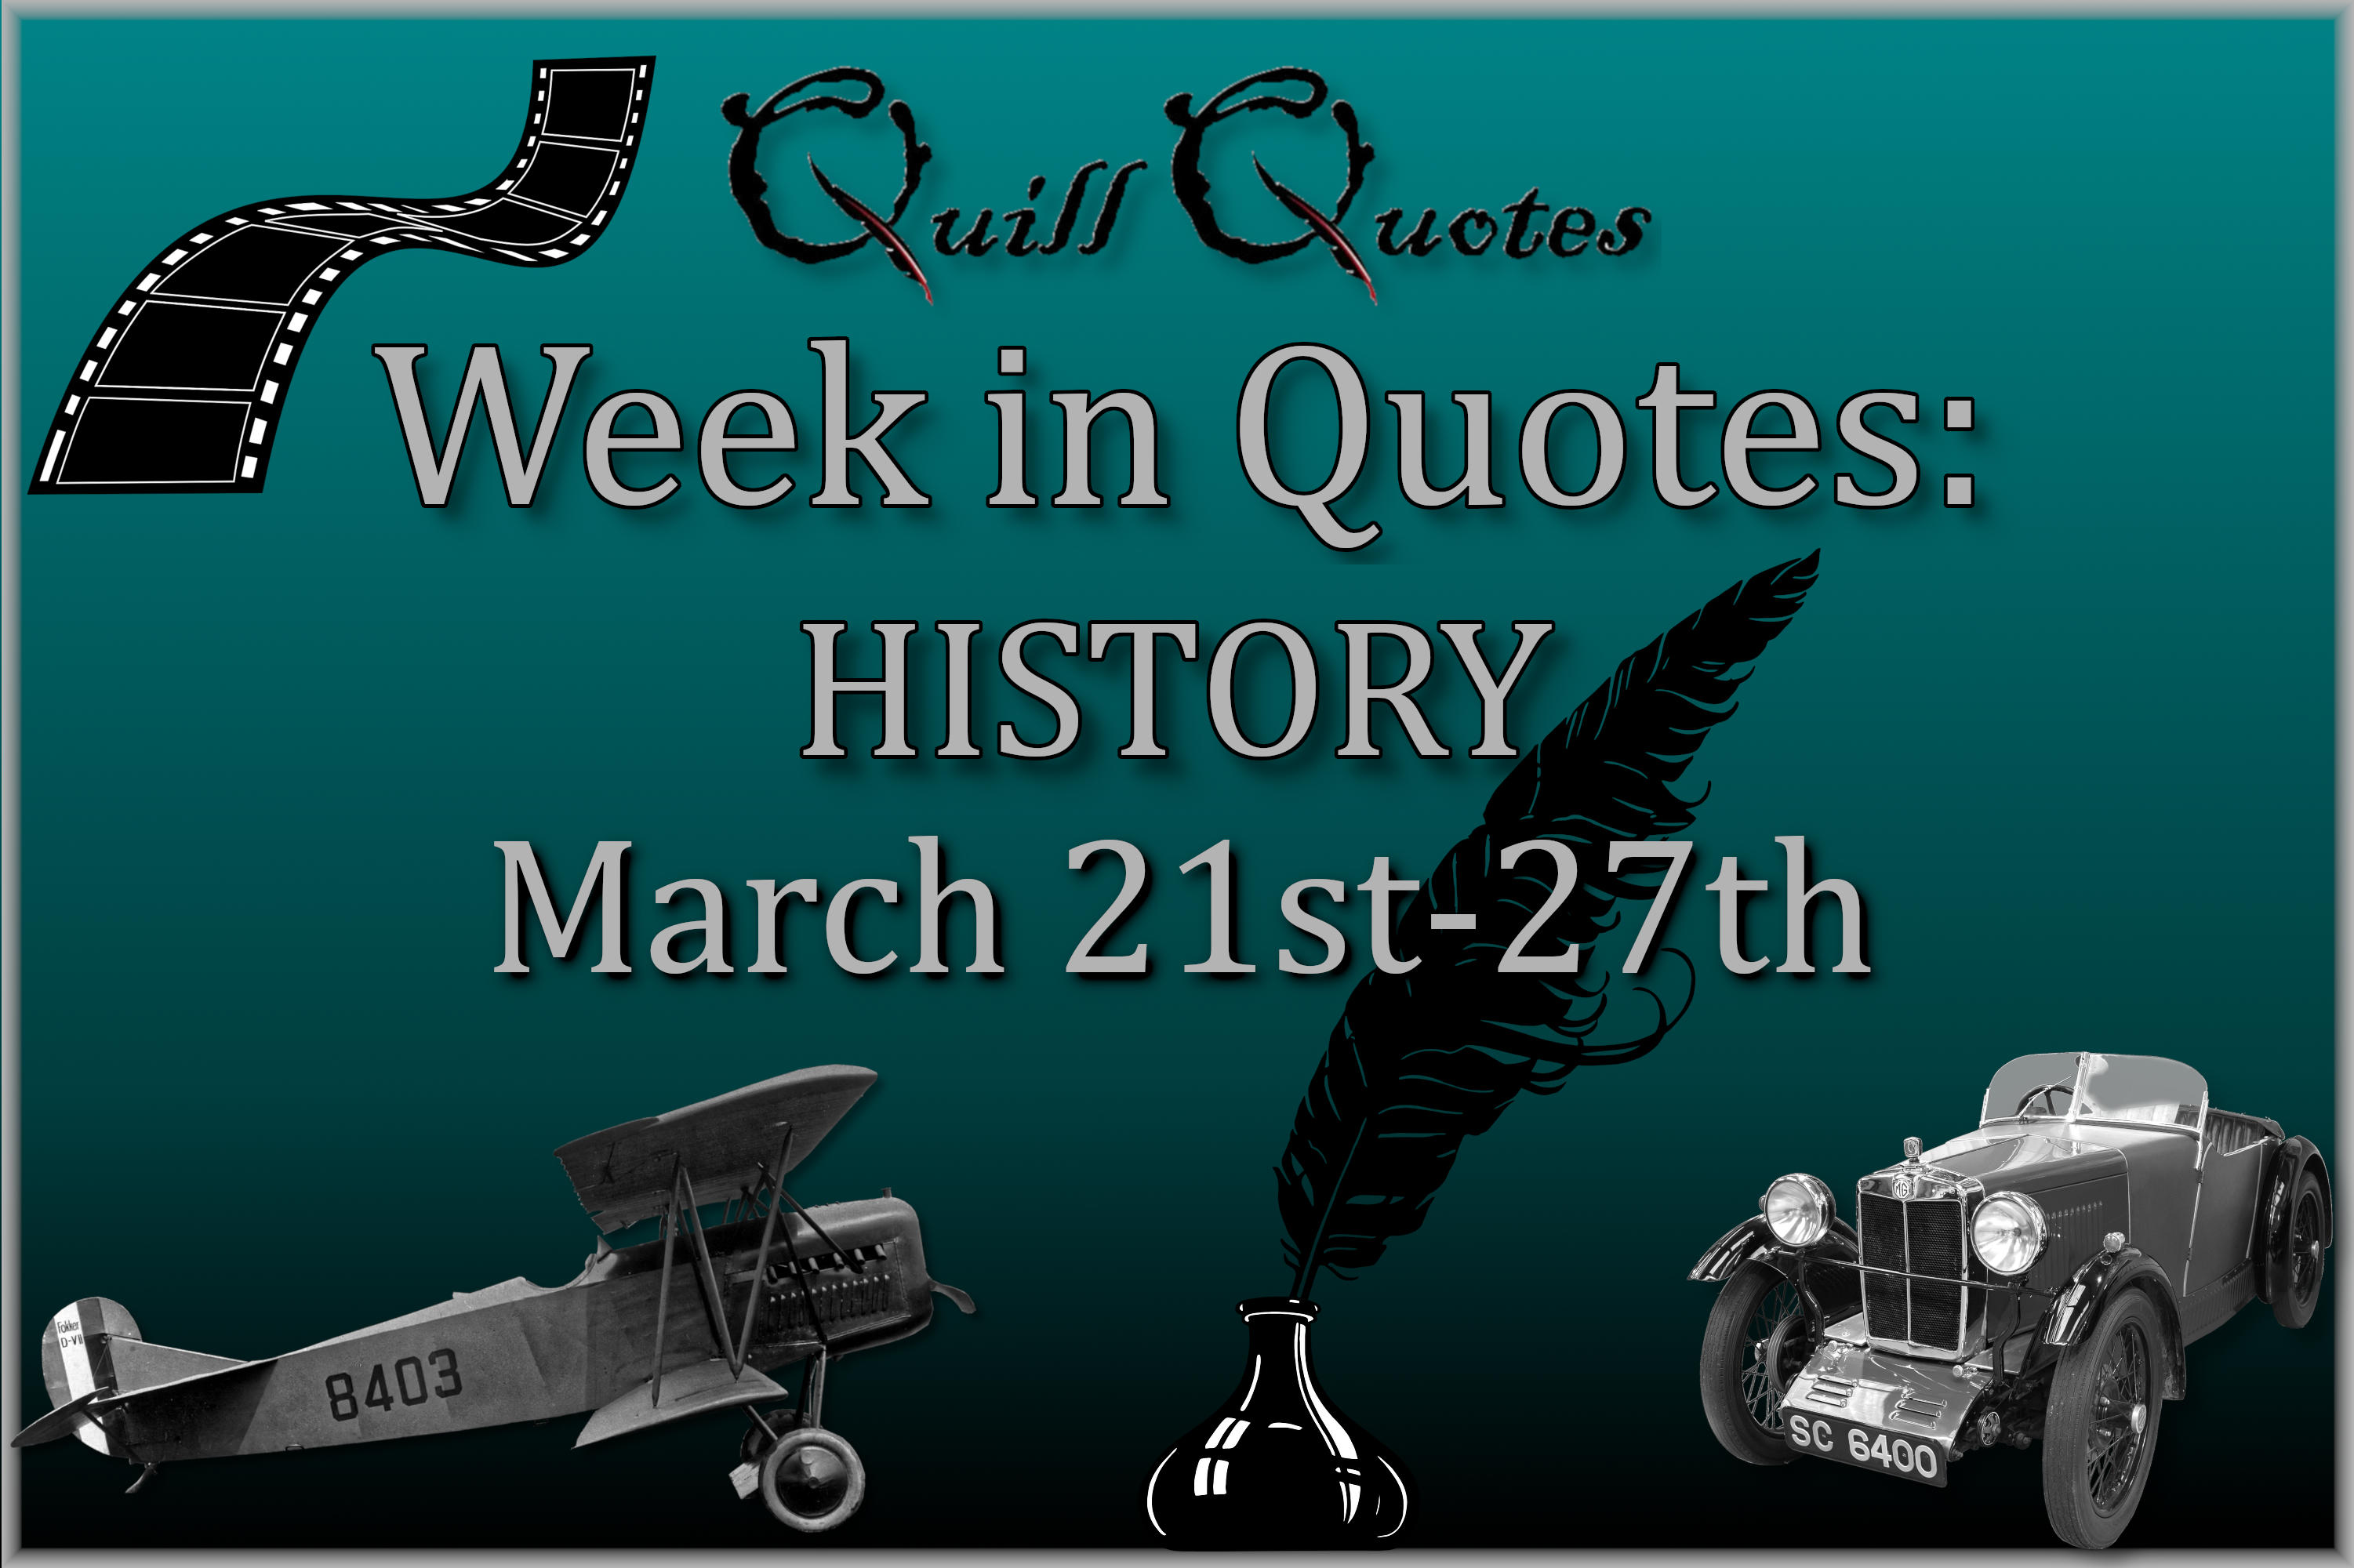 Week in Quotes: HISTORY March 21st-27th